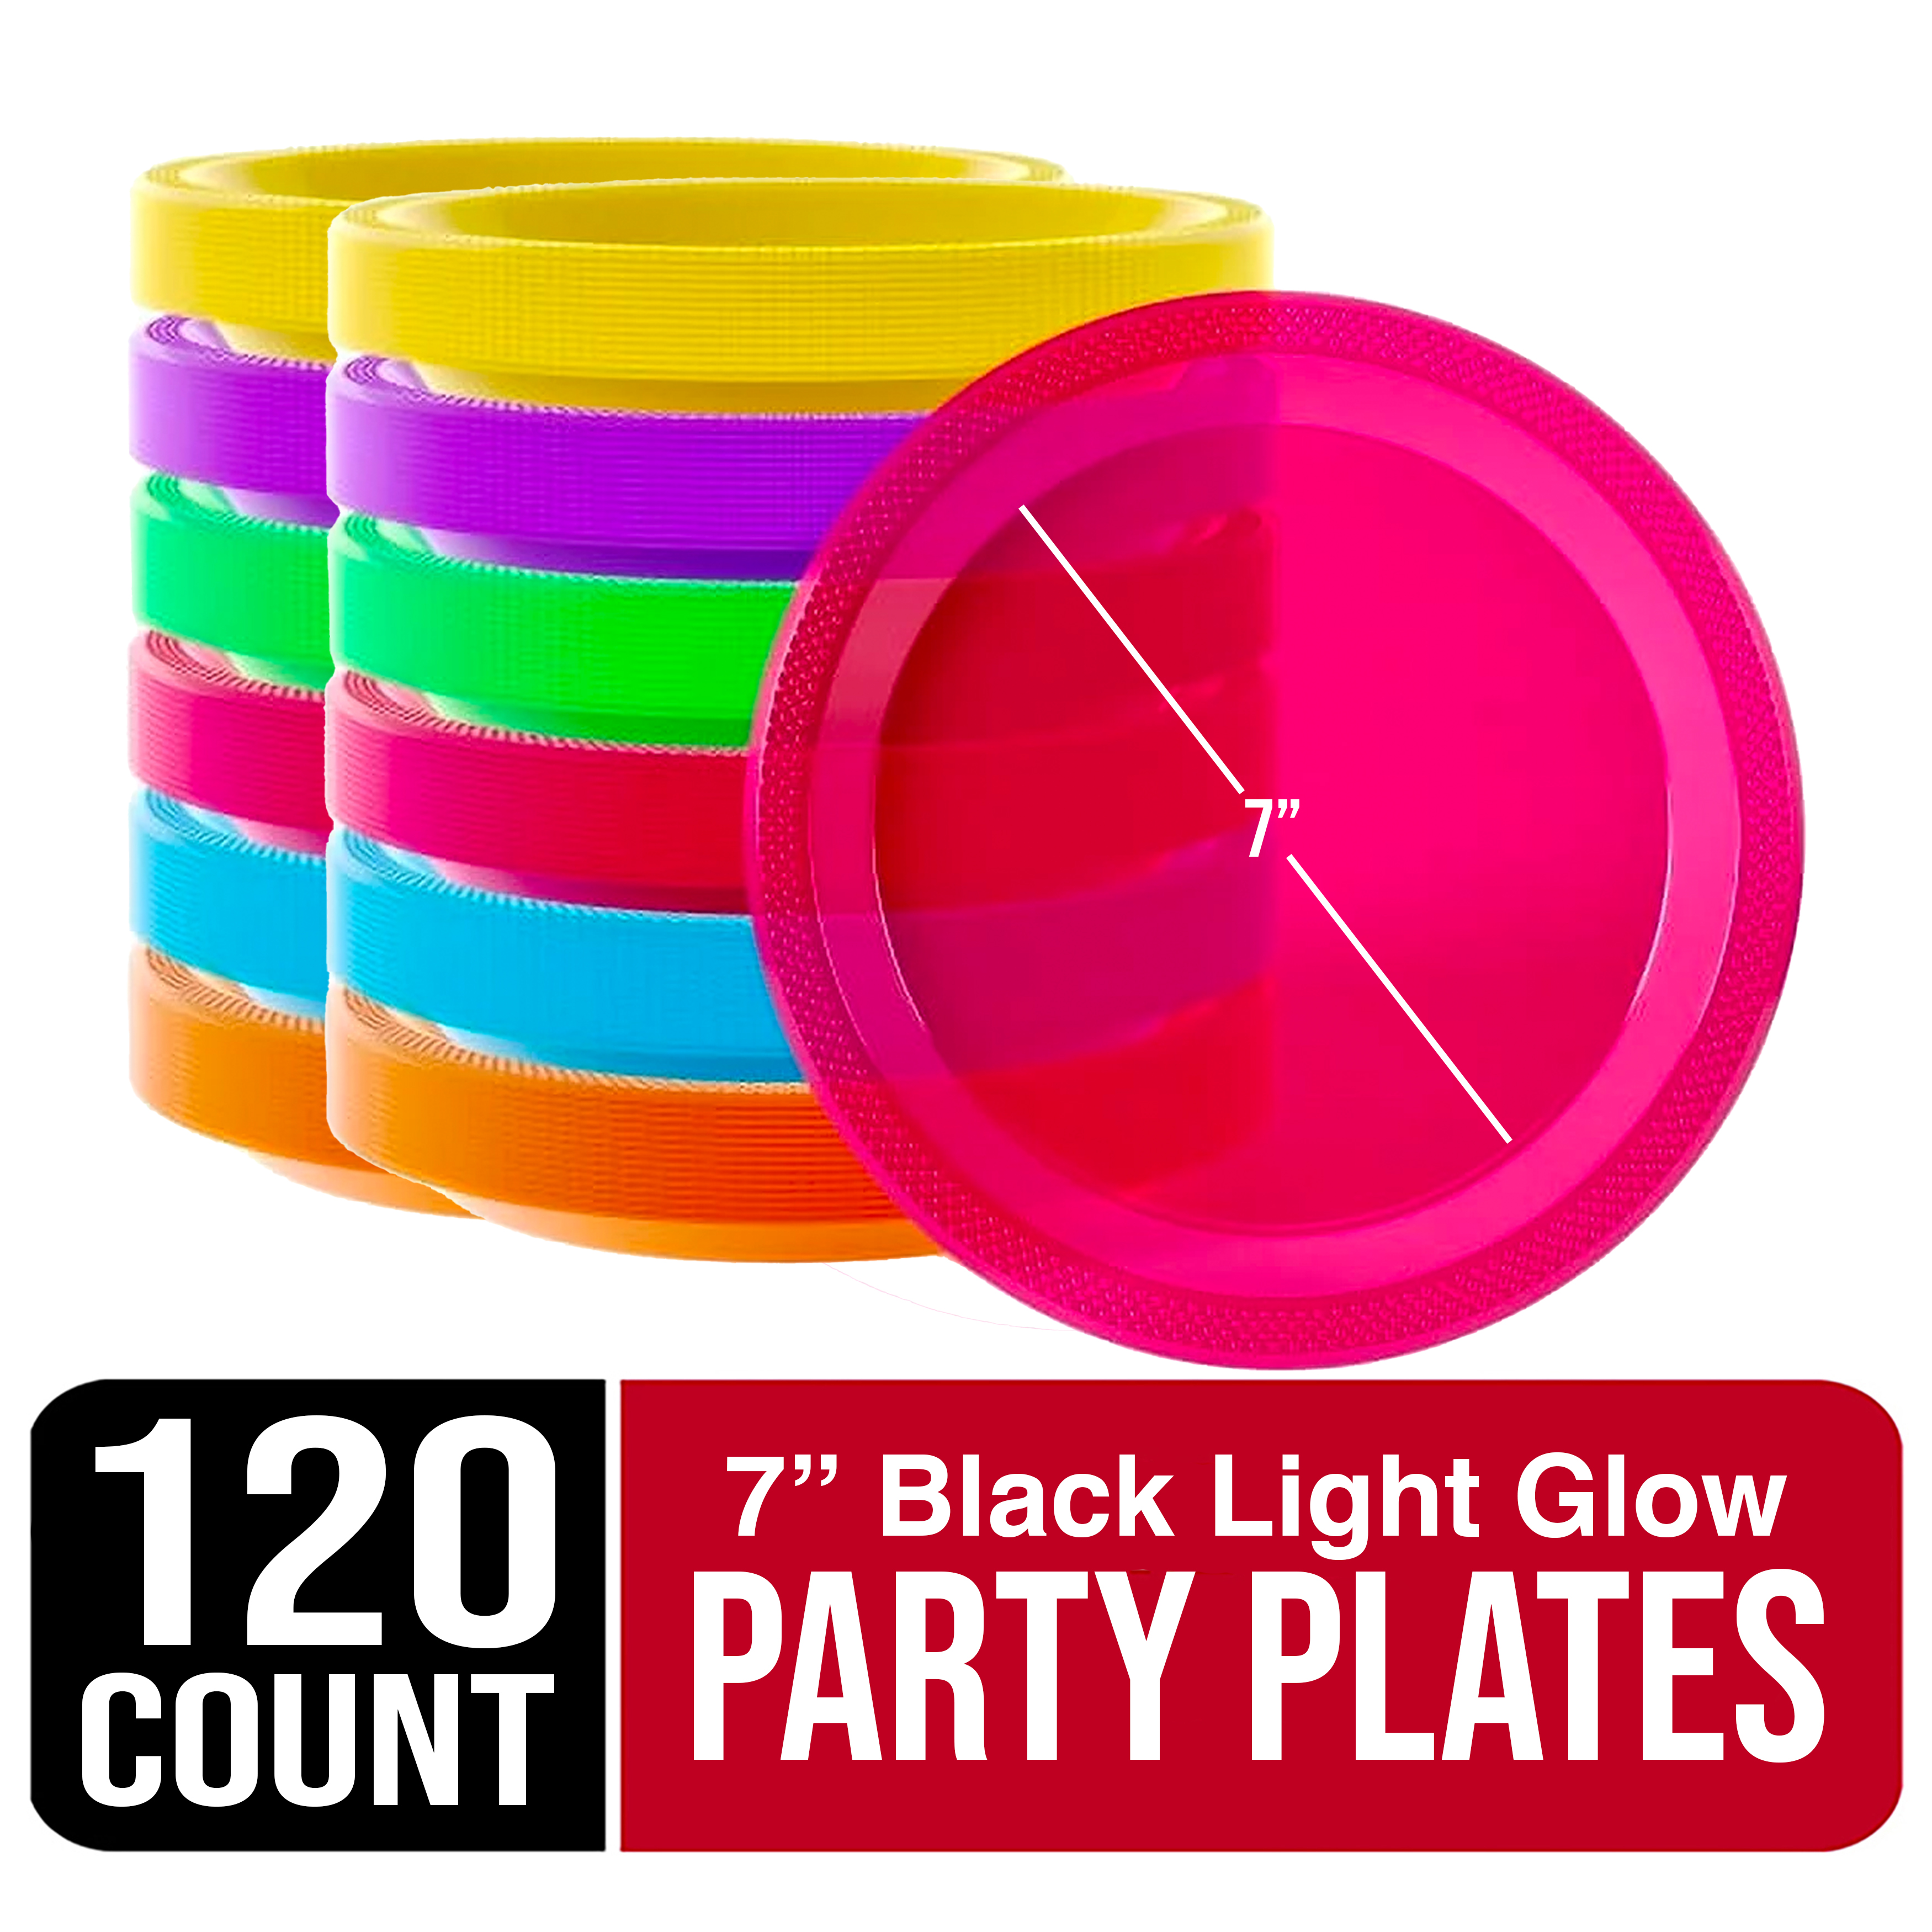 Exquisite Black Light Glow Party Plates - 7 Inch. - Assorted Colors - 120  count 